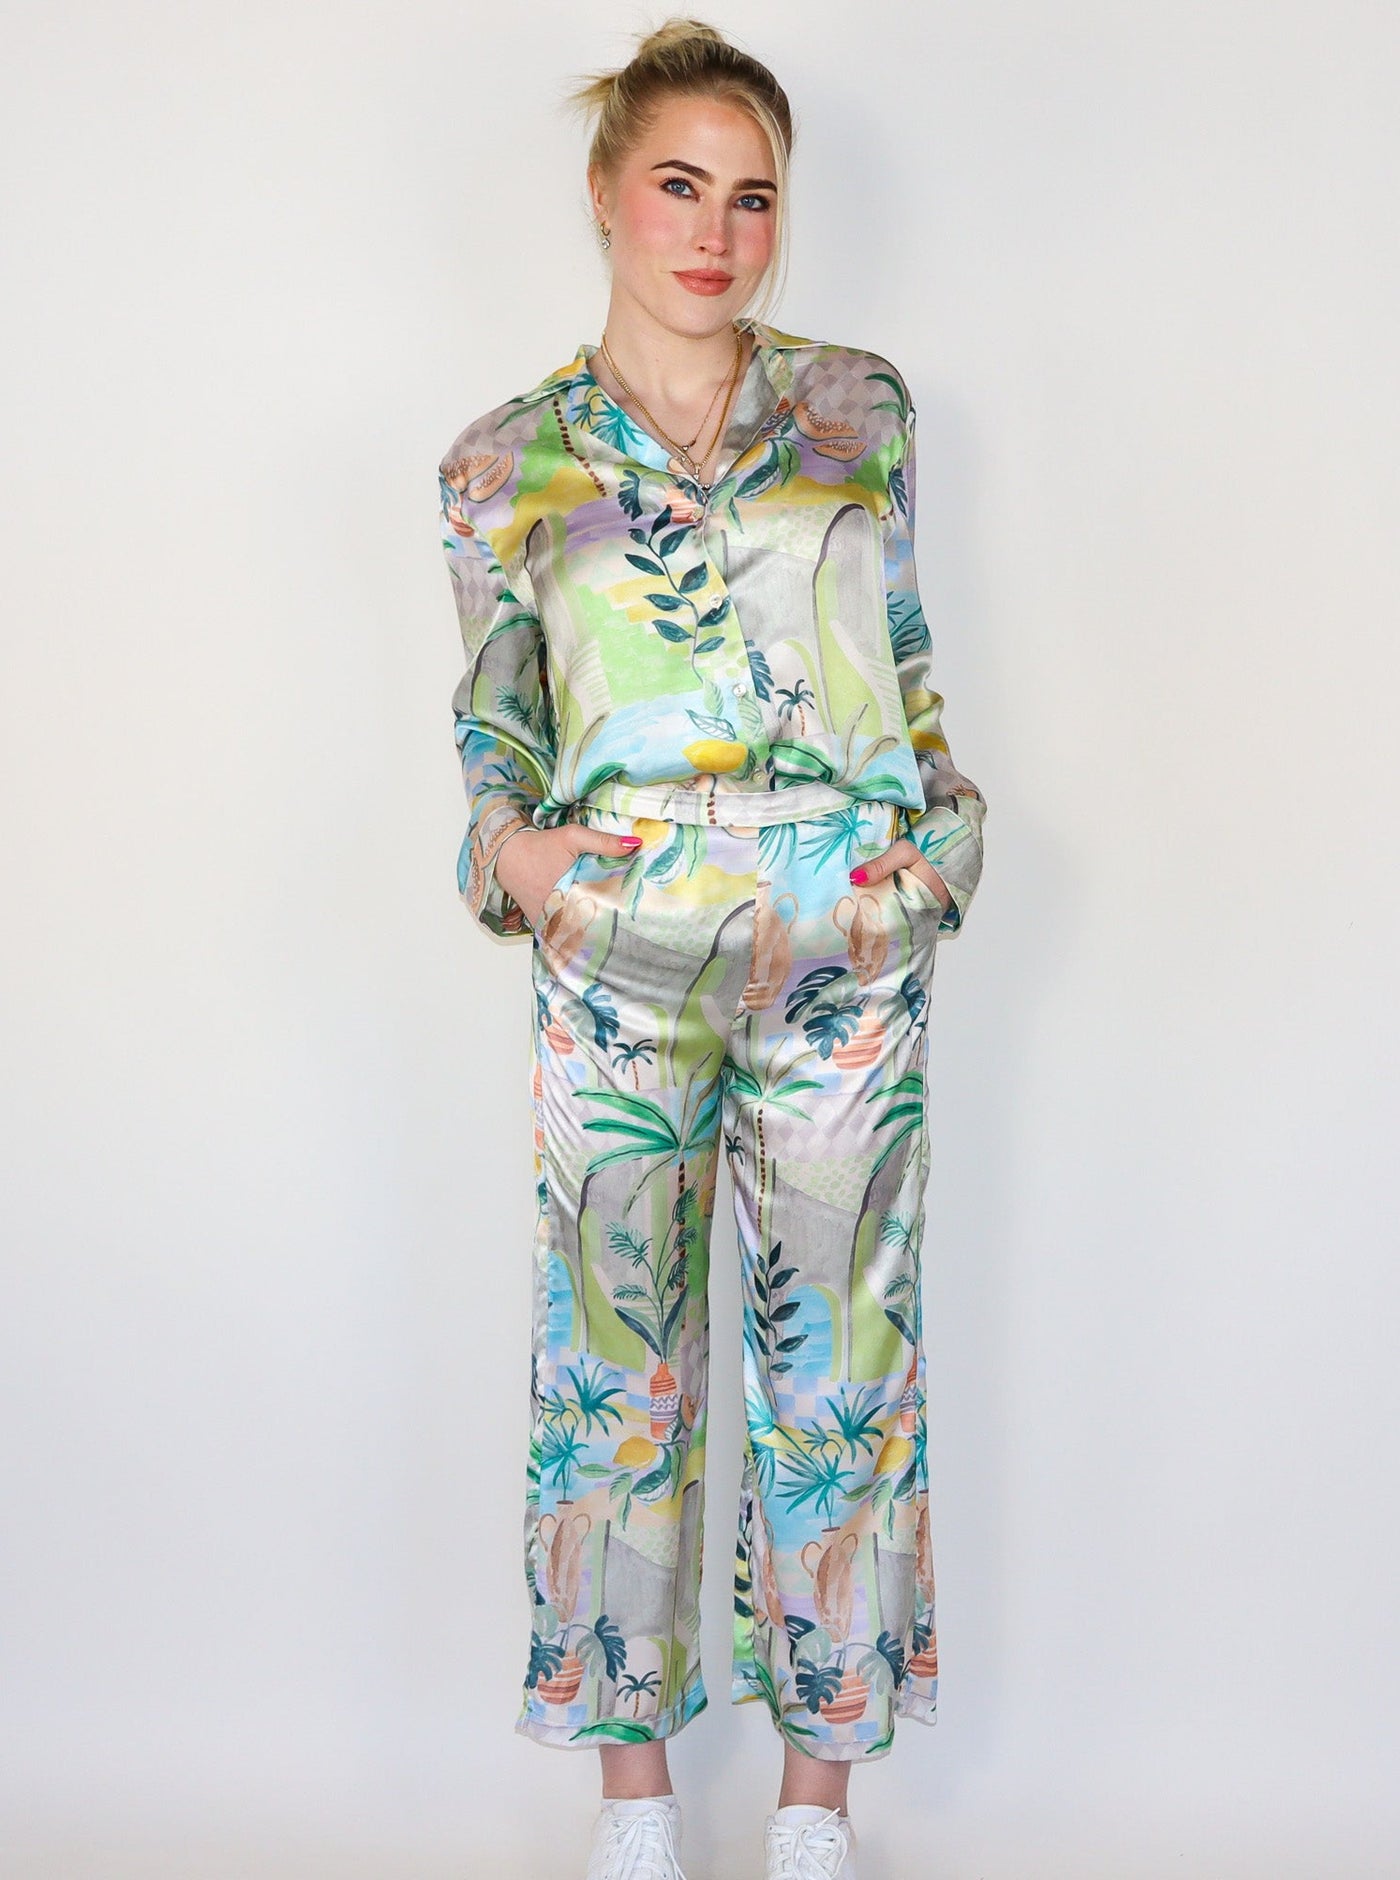 Model is wearing a high waisted multi colored printed pant that is silky material. Pants are paired with a matching top and white sneakers.